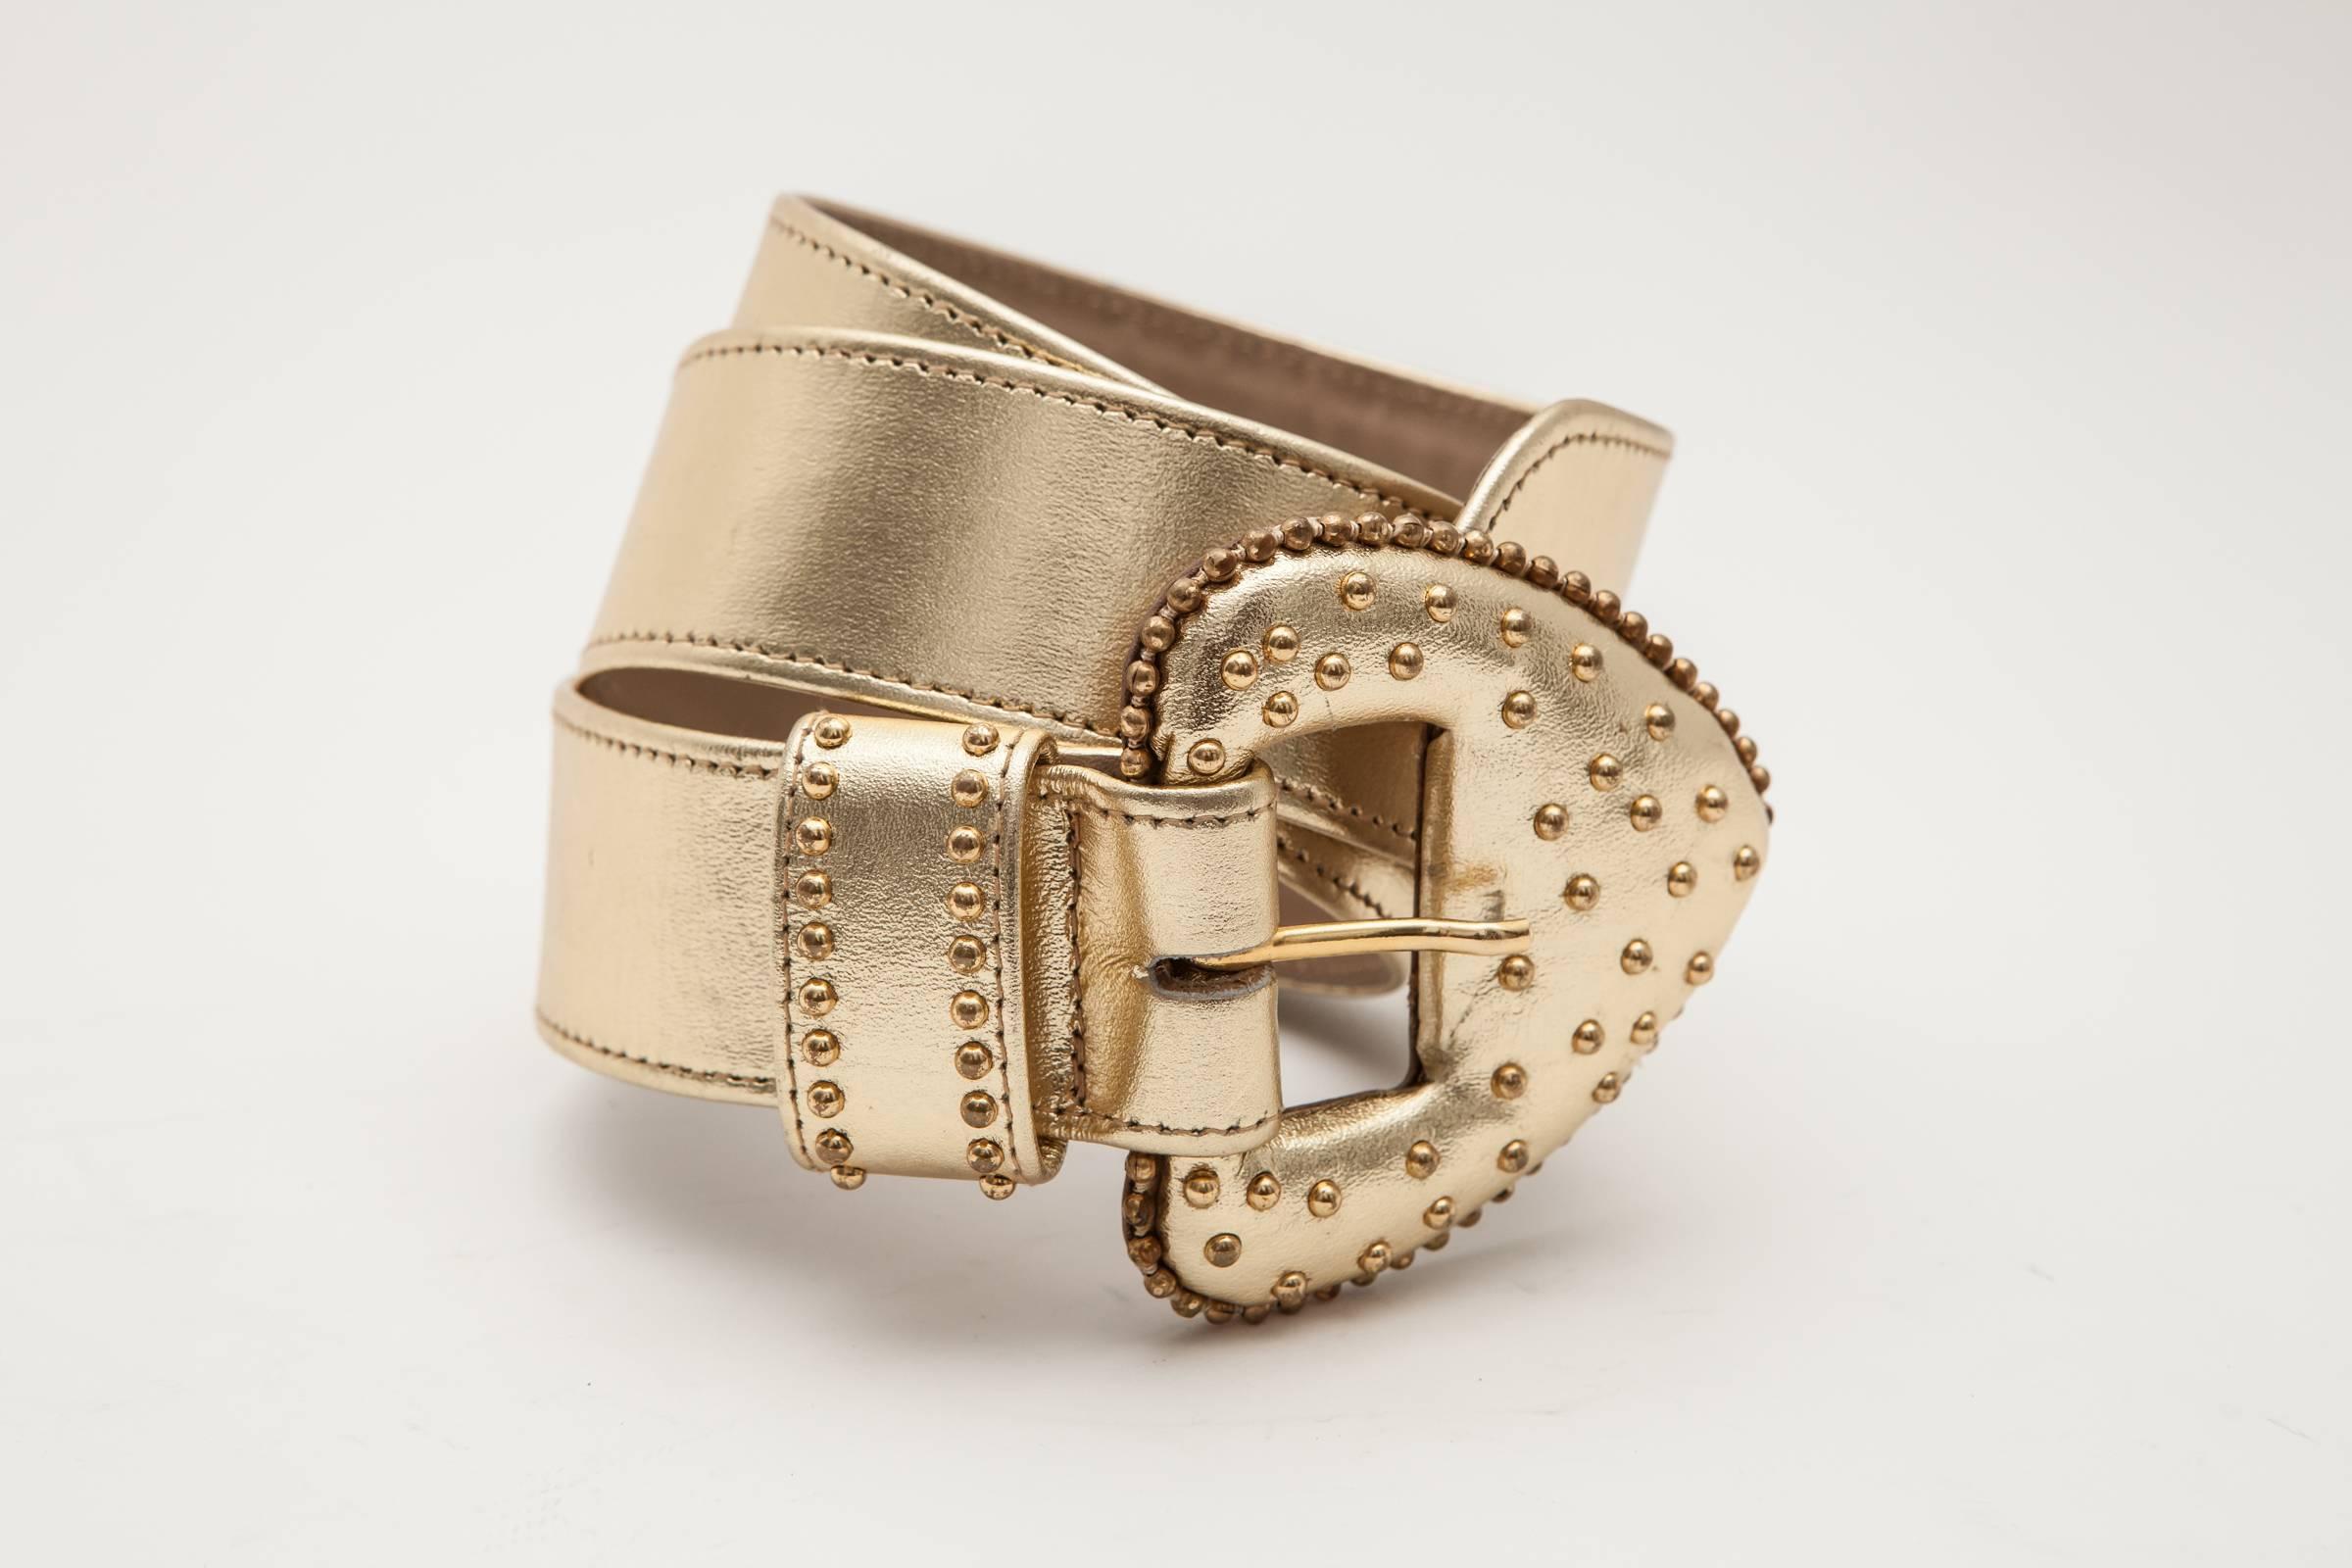 Gold leather belt with large studded buckle.